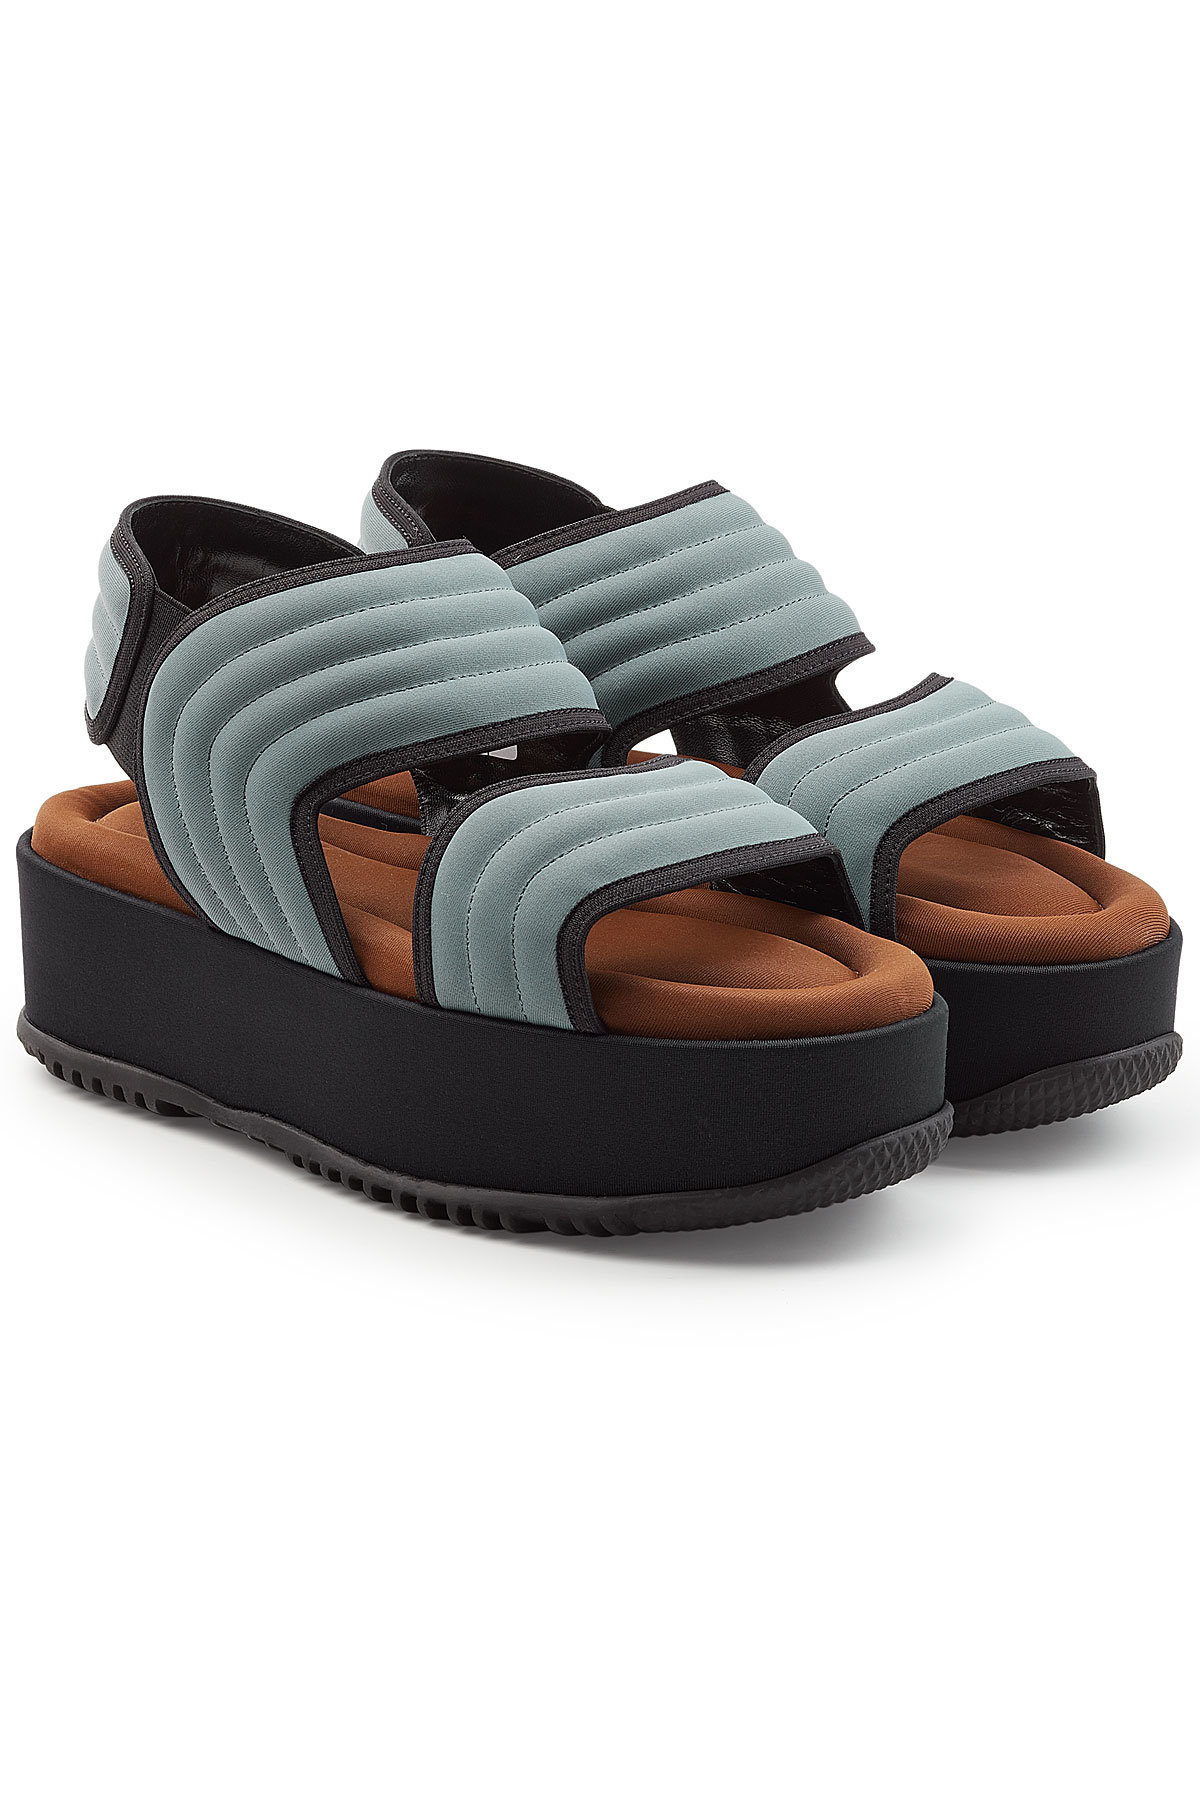 Sandals with Platform by Marni